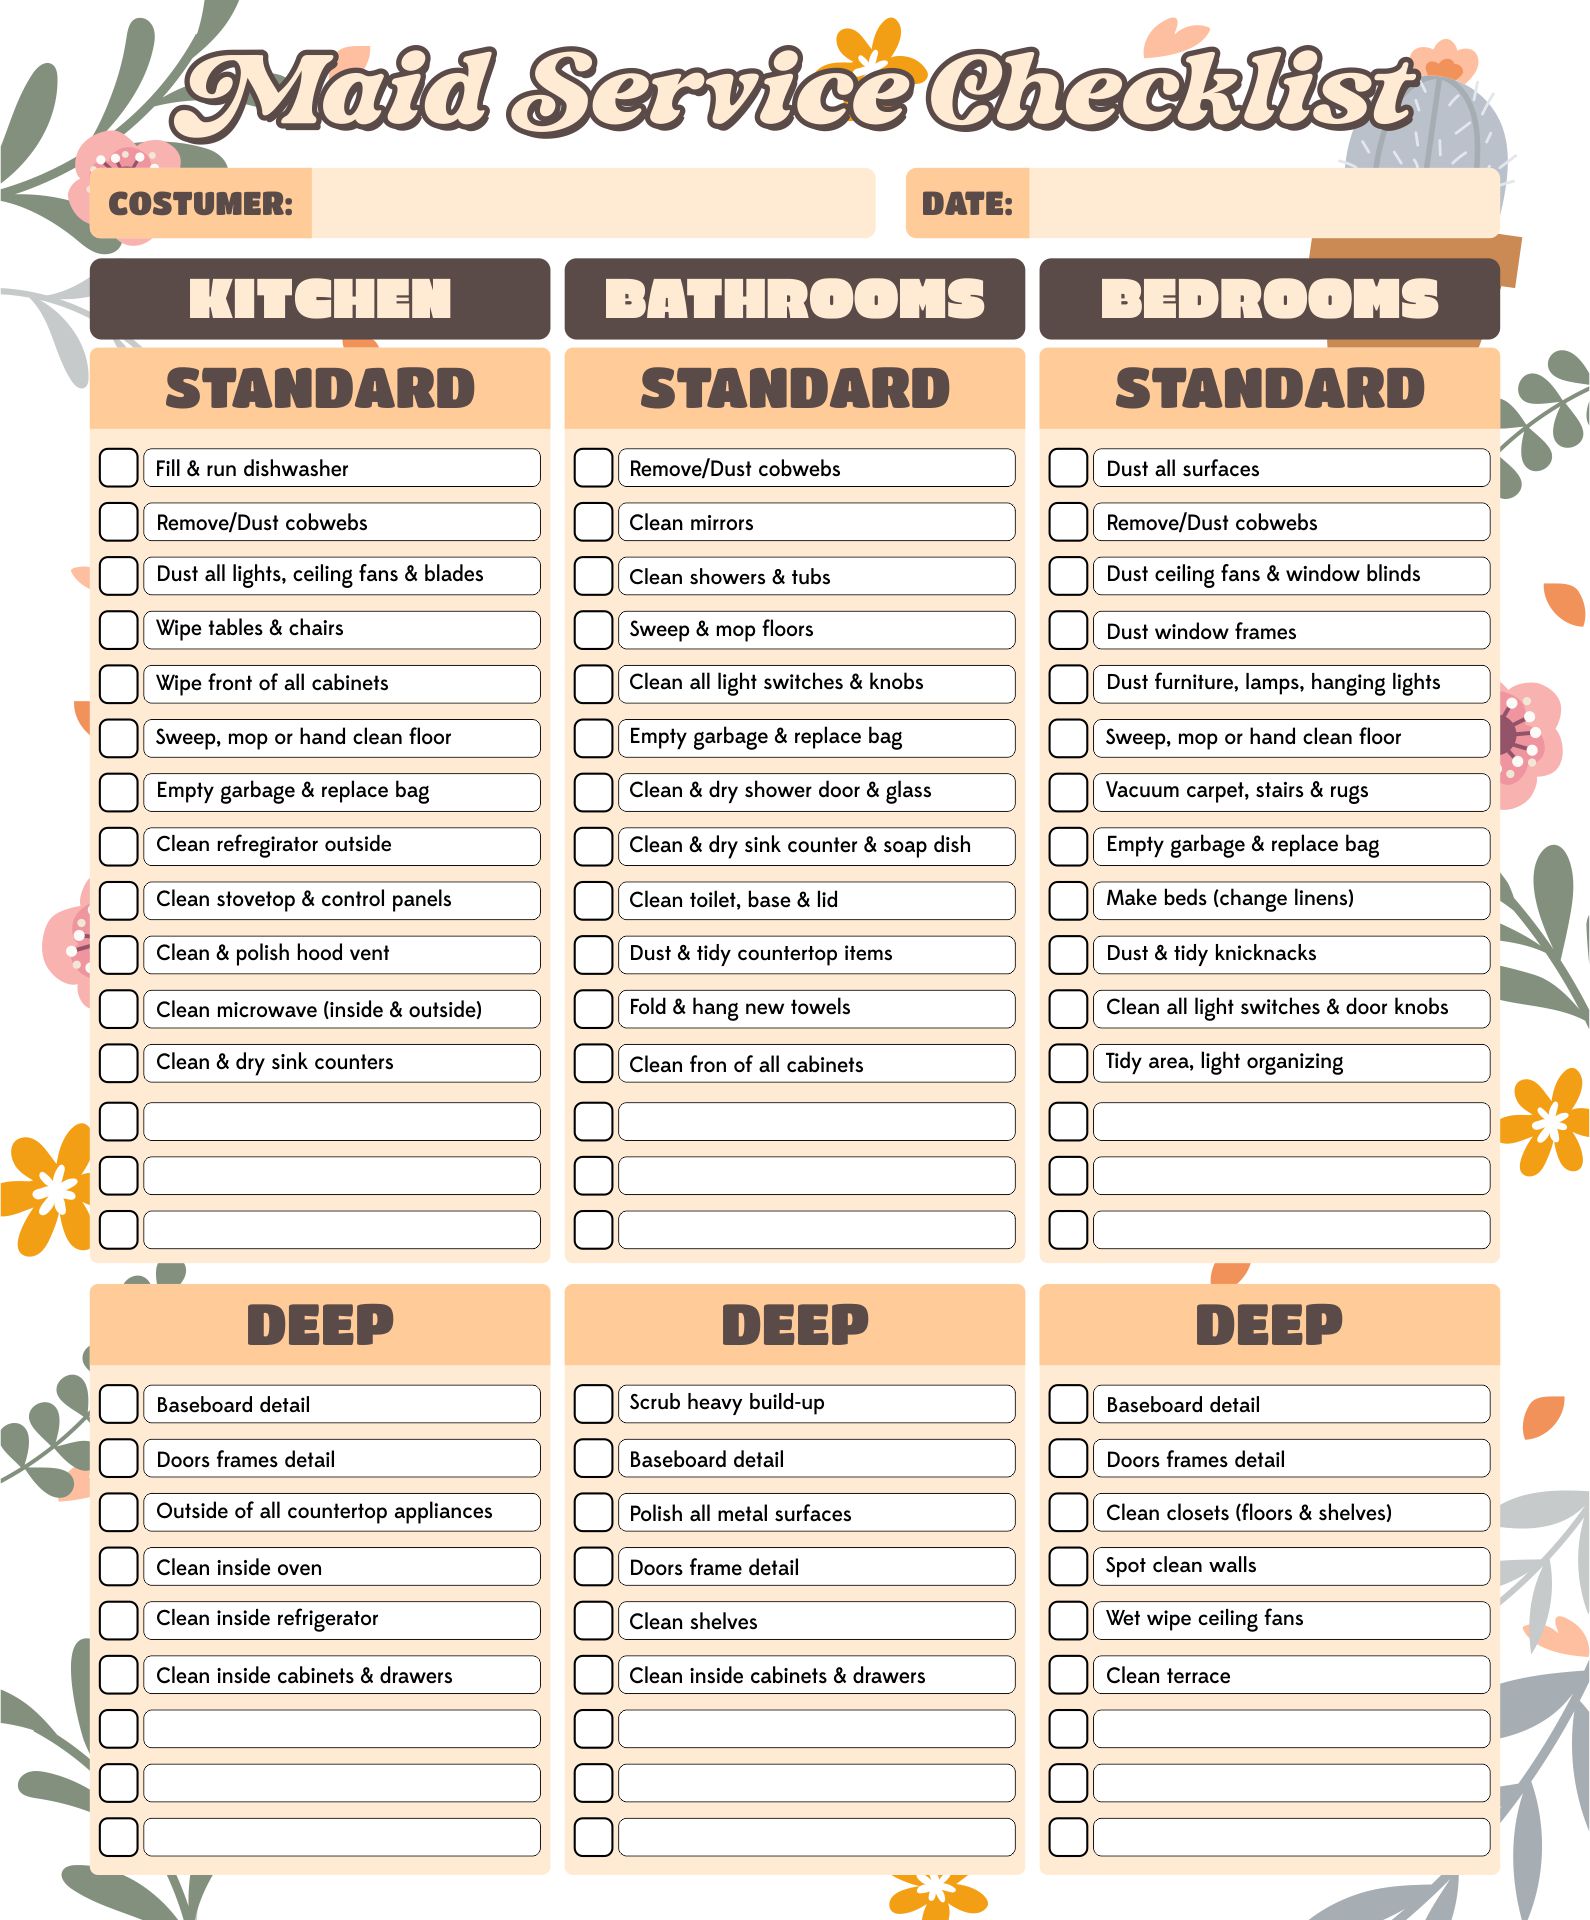 housekeeping-checklist-excel-templates-at-allbusinesstemplates